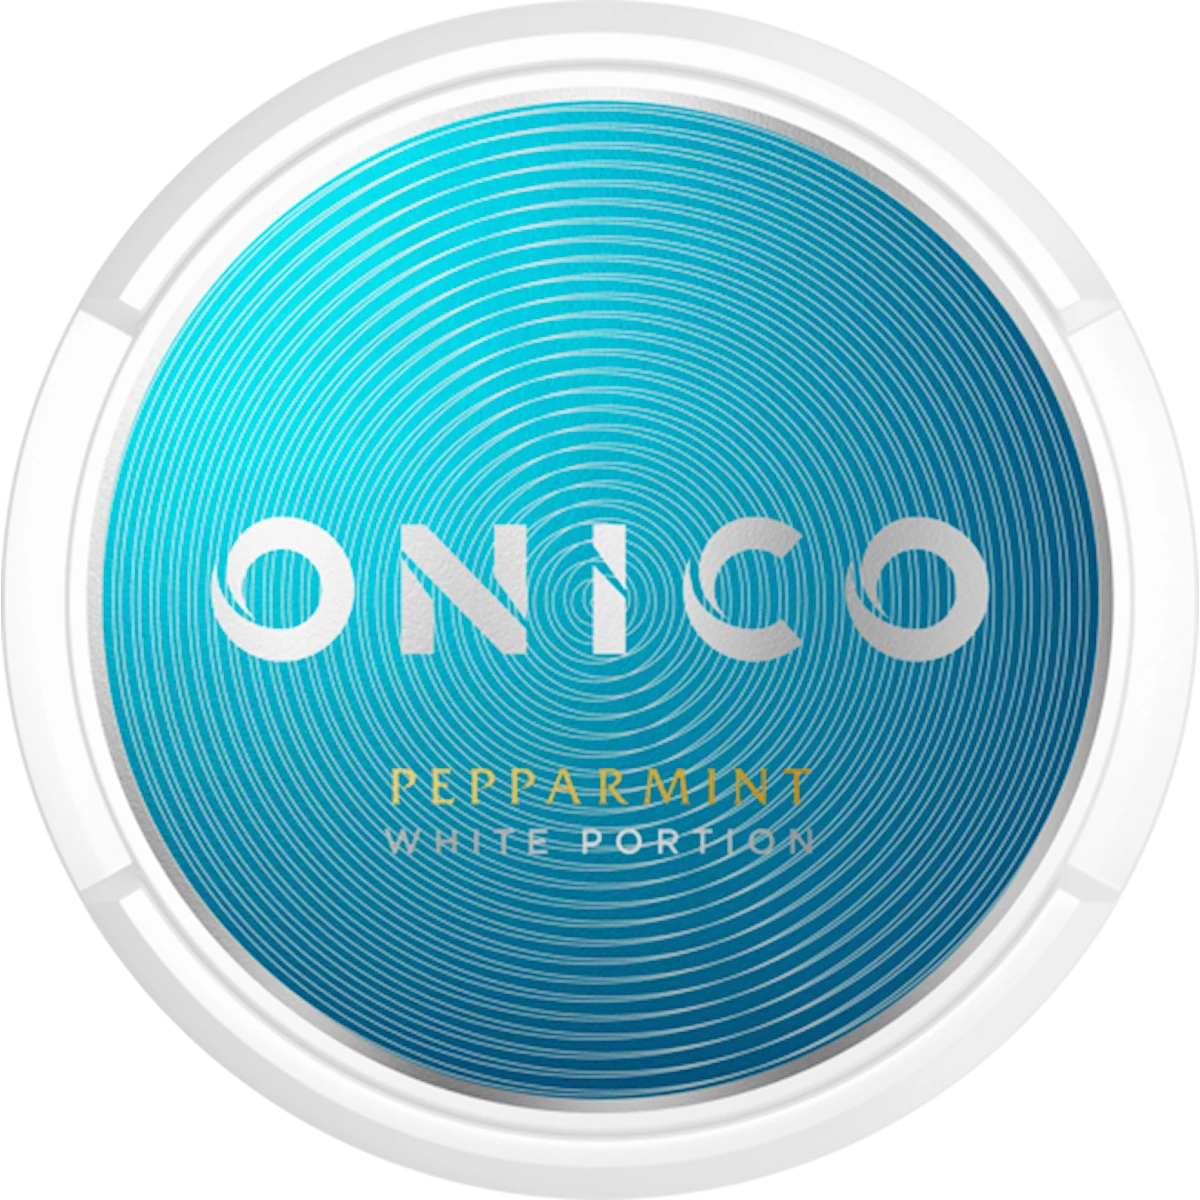 Onico Peppermint White Portion